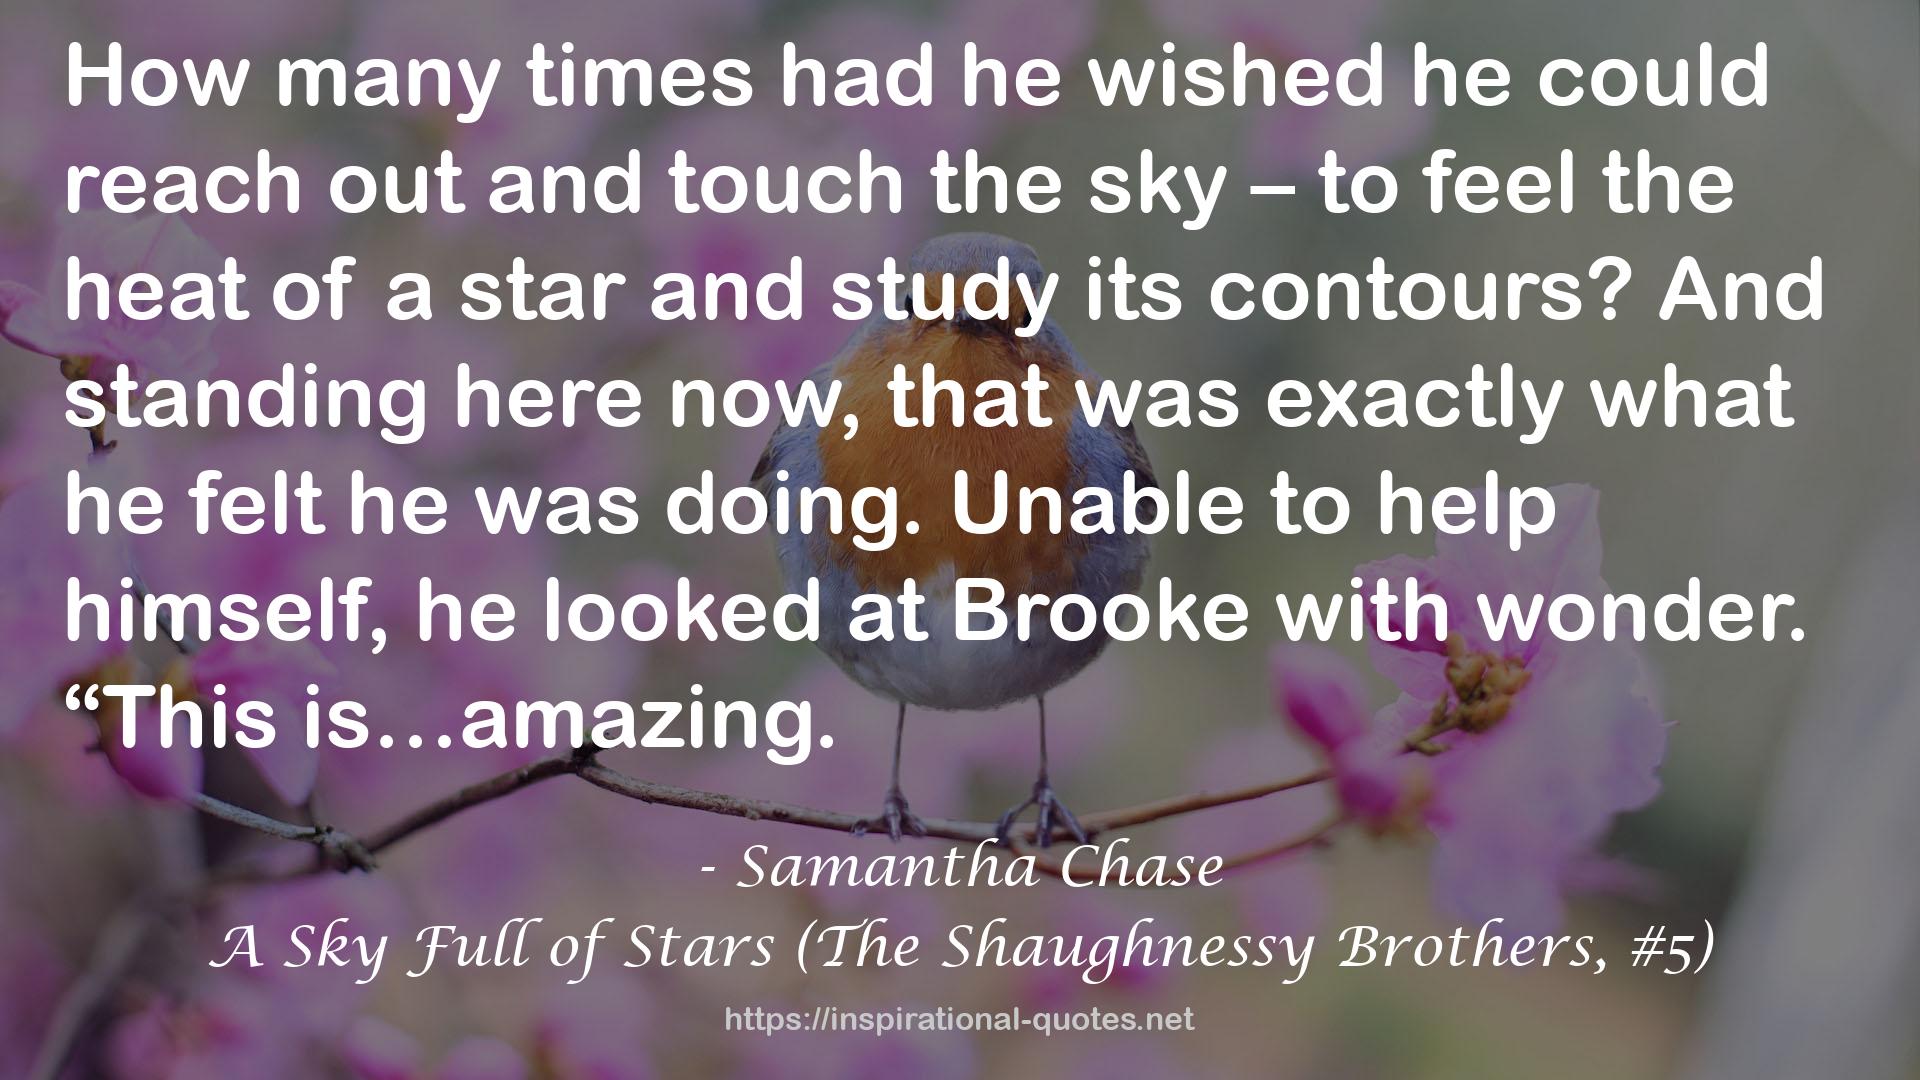 A Sky Full of Stars (The Shaughnessy Brothers, #5) QUOTES